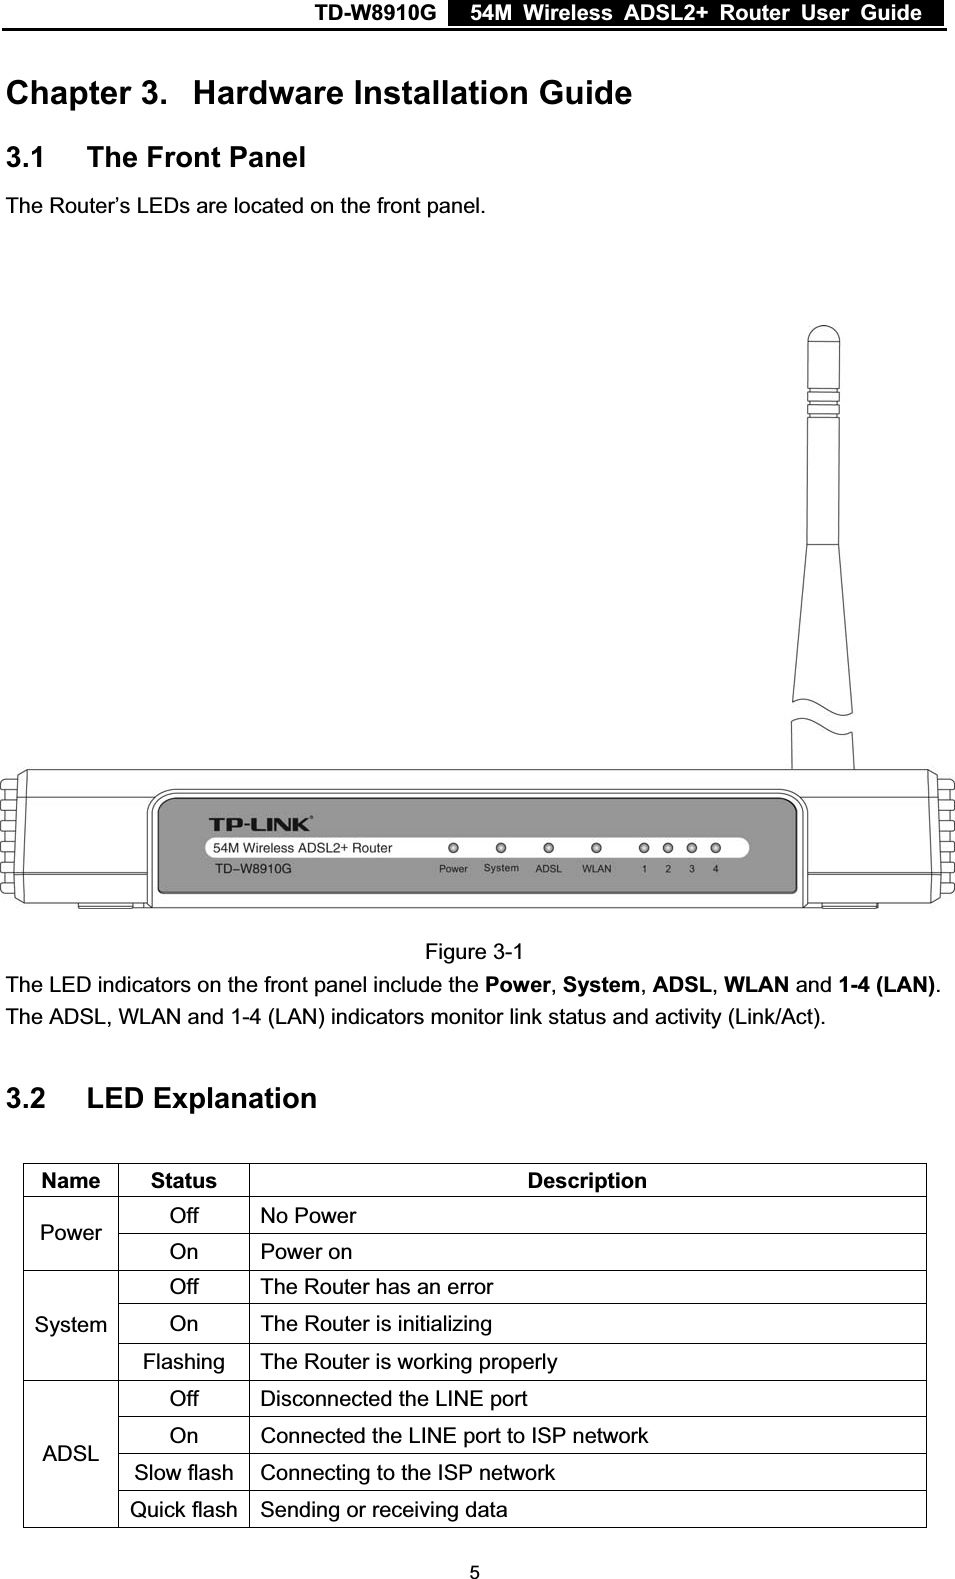 TD-W8910G    54M Wireless ADSL2+ Router User Guide  Chapter 3. Hardware Installation Guide 3.1 The Front Panel The Router’s LEDs are located on the front panel. Figure 3-1 The LED indicators on the front panel include the Power,System,ADSL,WLAN and 1-4 (LAN).The ADSL, WLAN and 1-4 (LAN) indicators monitor link status and activity (Link/Act). 3.2 LED Explanation Name Status Description Off No Power Power On Power on Off The Router has an error On The Router is initializing SystemFlashing The Router is working properly Off Disconnected the LINE port On    Connected the LINE port to ISP network   Slow flash Connecting to the ISP network ADSLQuick flash Sending or receiving data  5